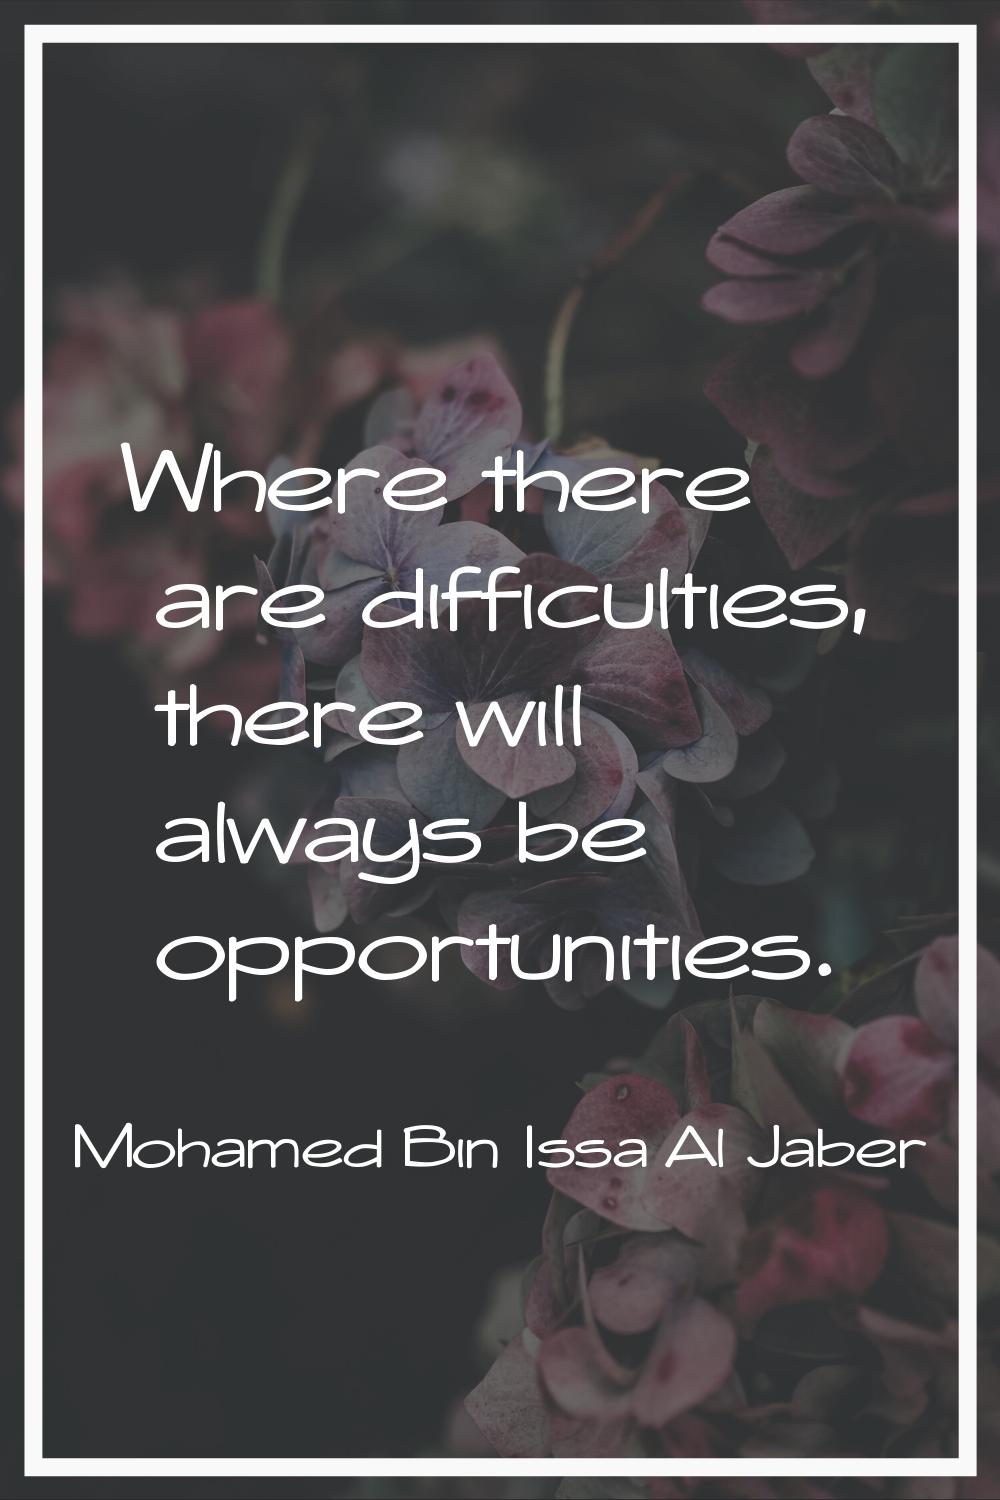 Where there are difficulties, there will always be opportunities.